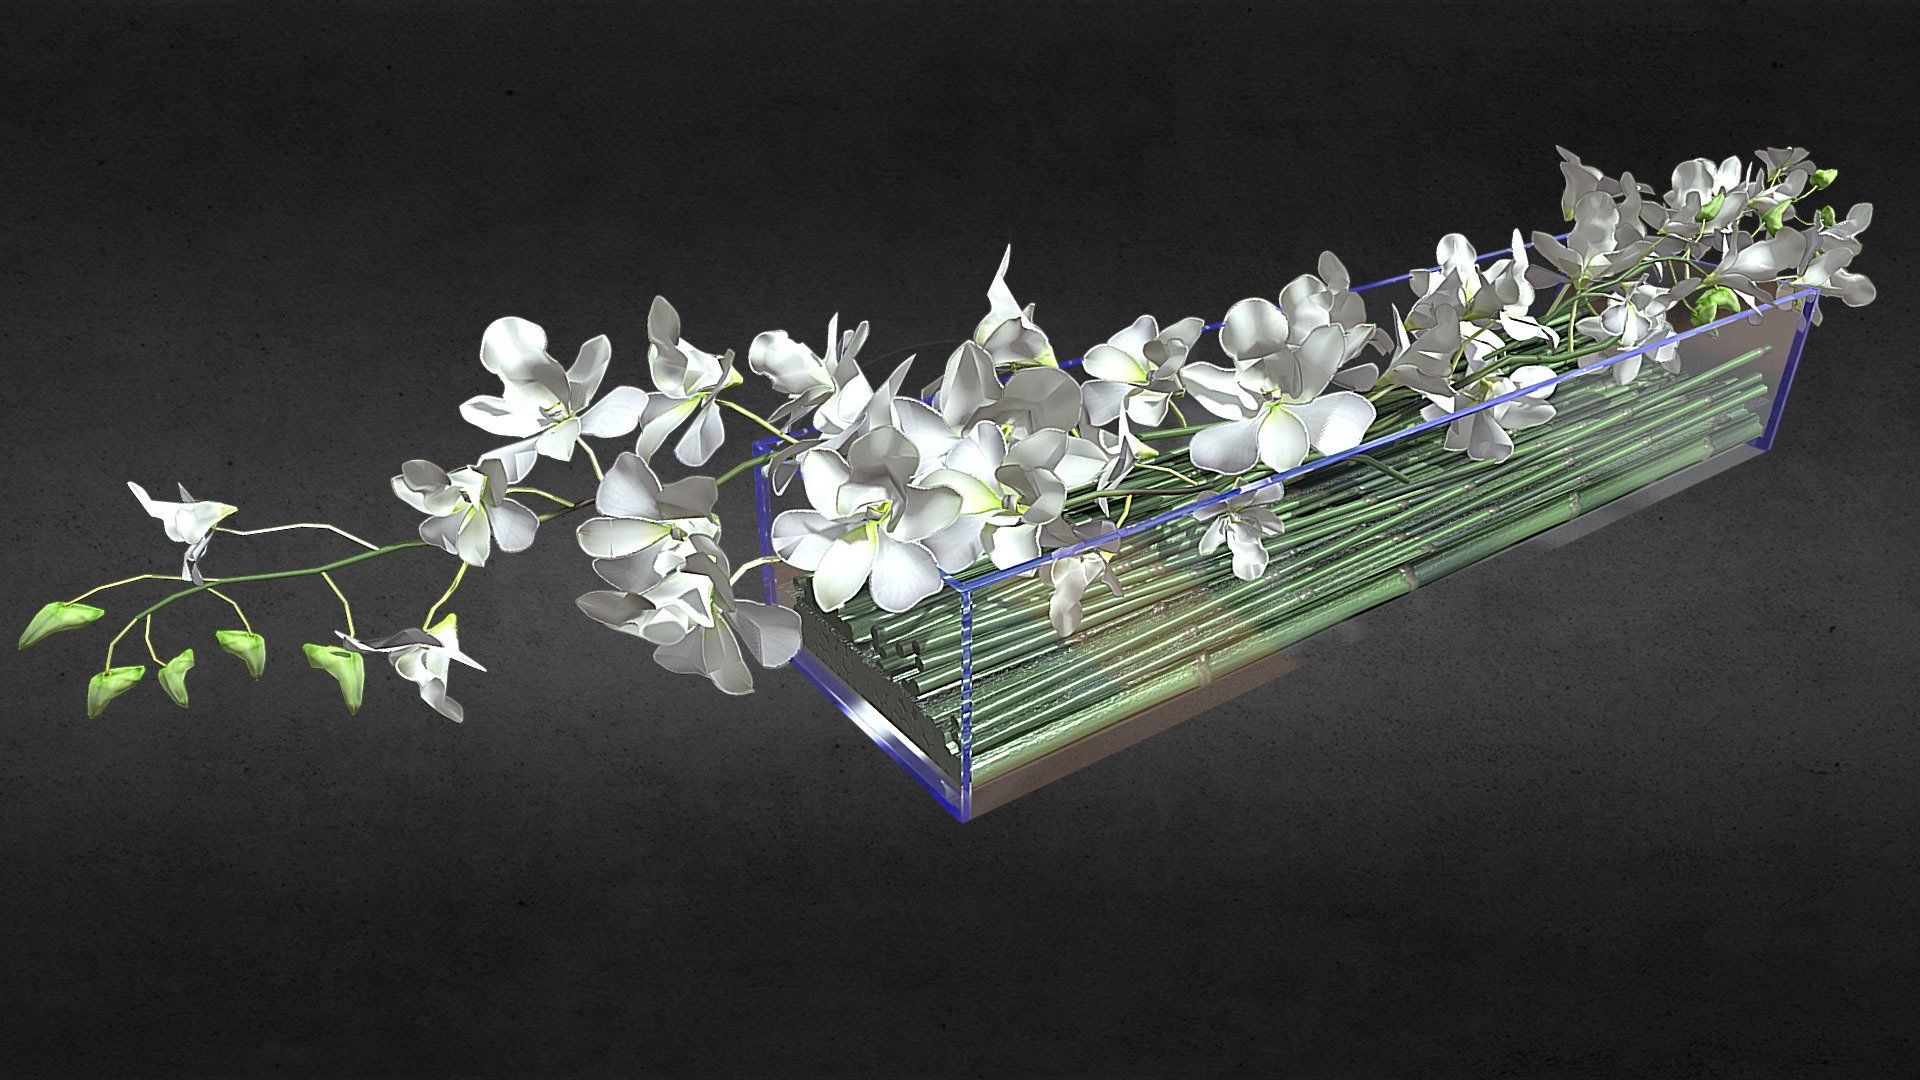 lily flowers below is bamboo. In a glass vase. For low poly games - lily flowers and bamboo - 3D model by centaurus21 3d model